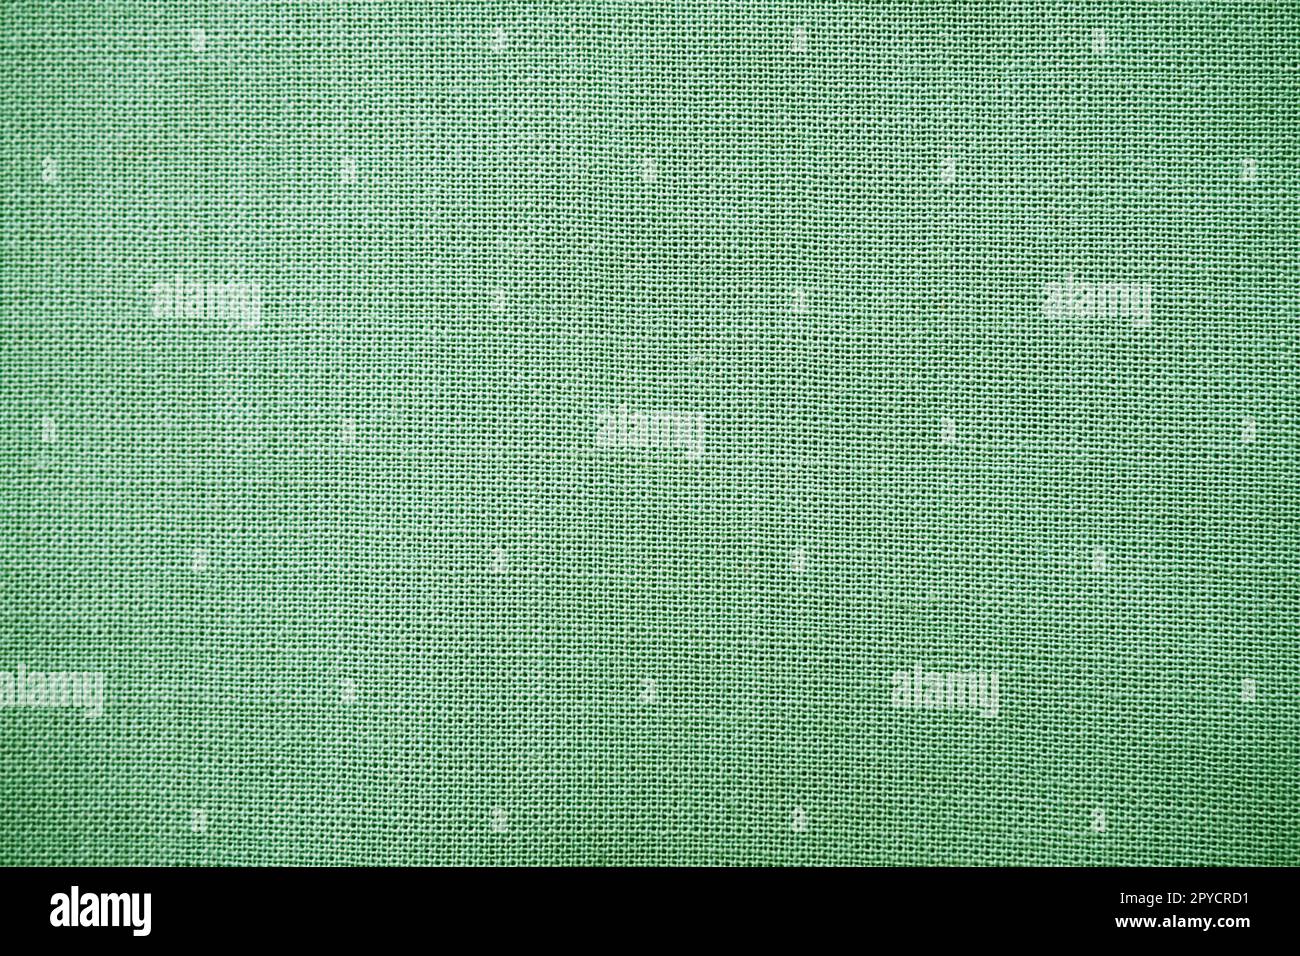 texture of natural green fabric close-up. The texture of the fabric is made of natural cotton or linen textile material. Green canvas background. Smooth surface, smoothed fabric Stock Photo